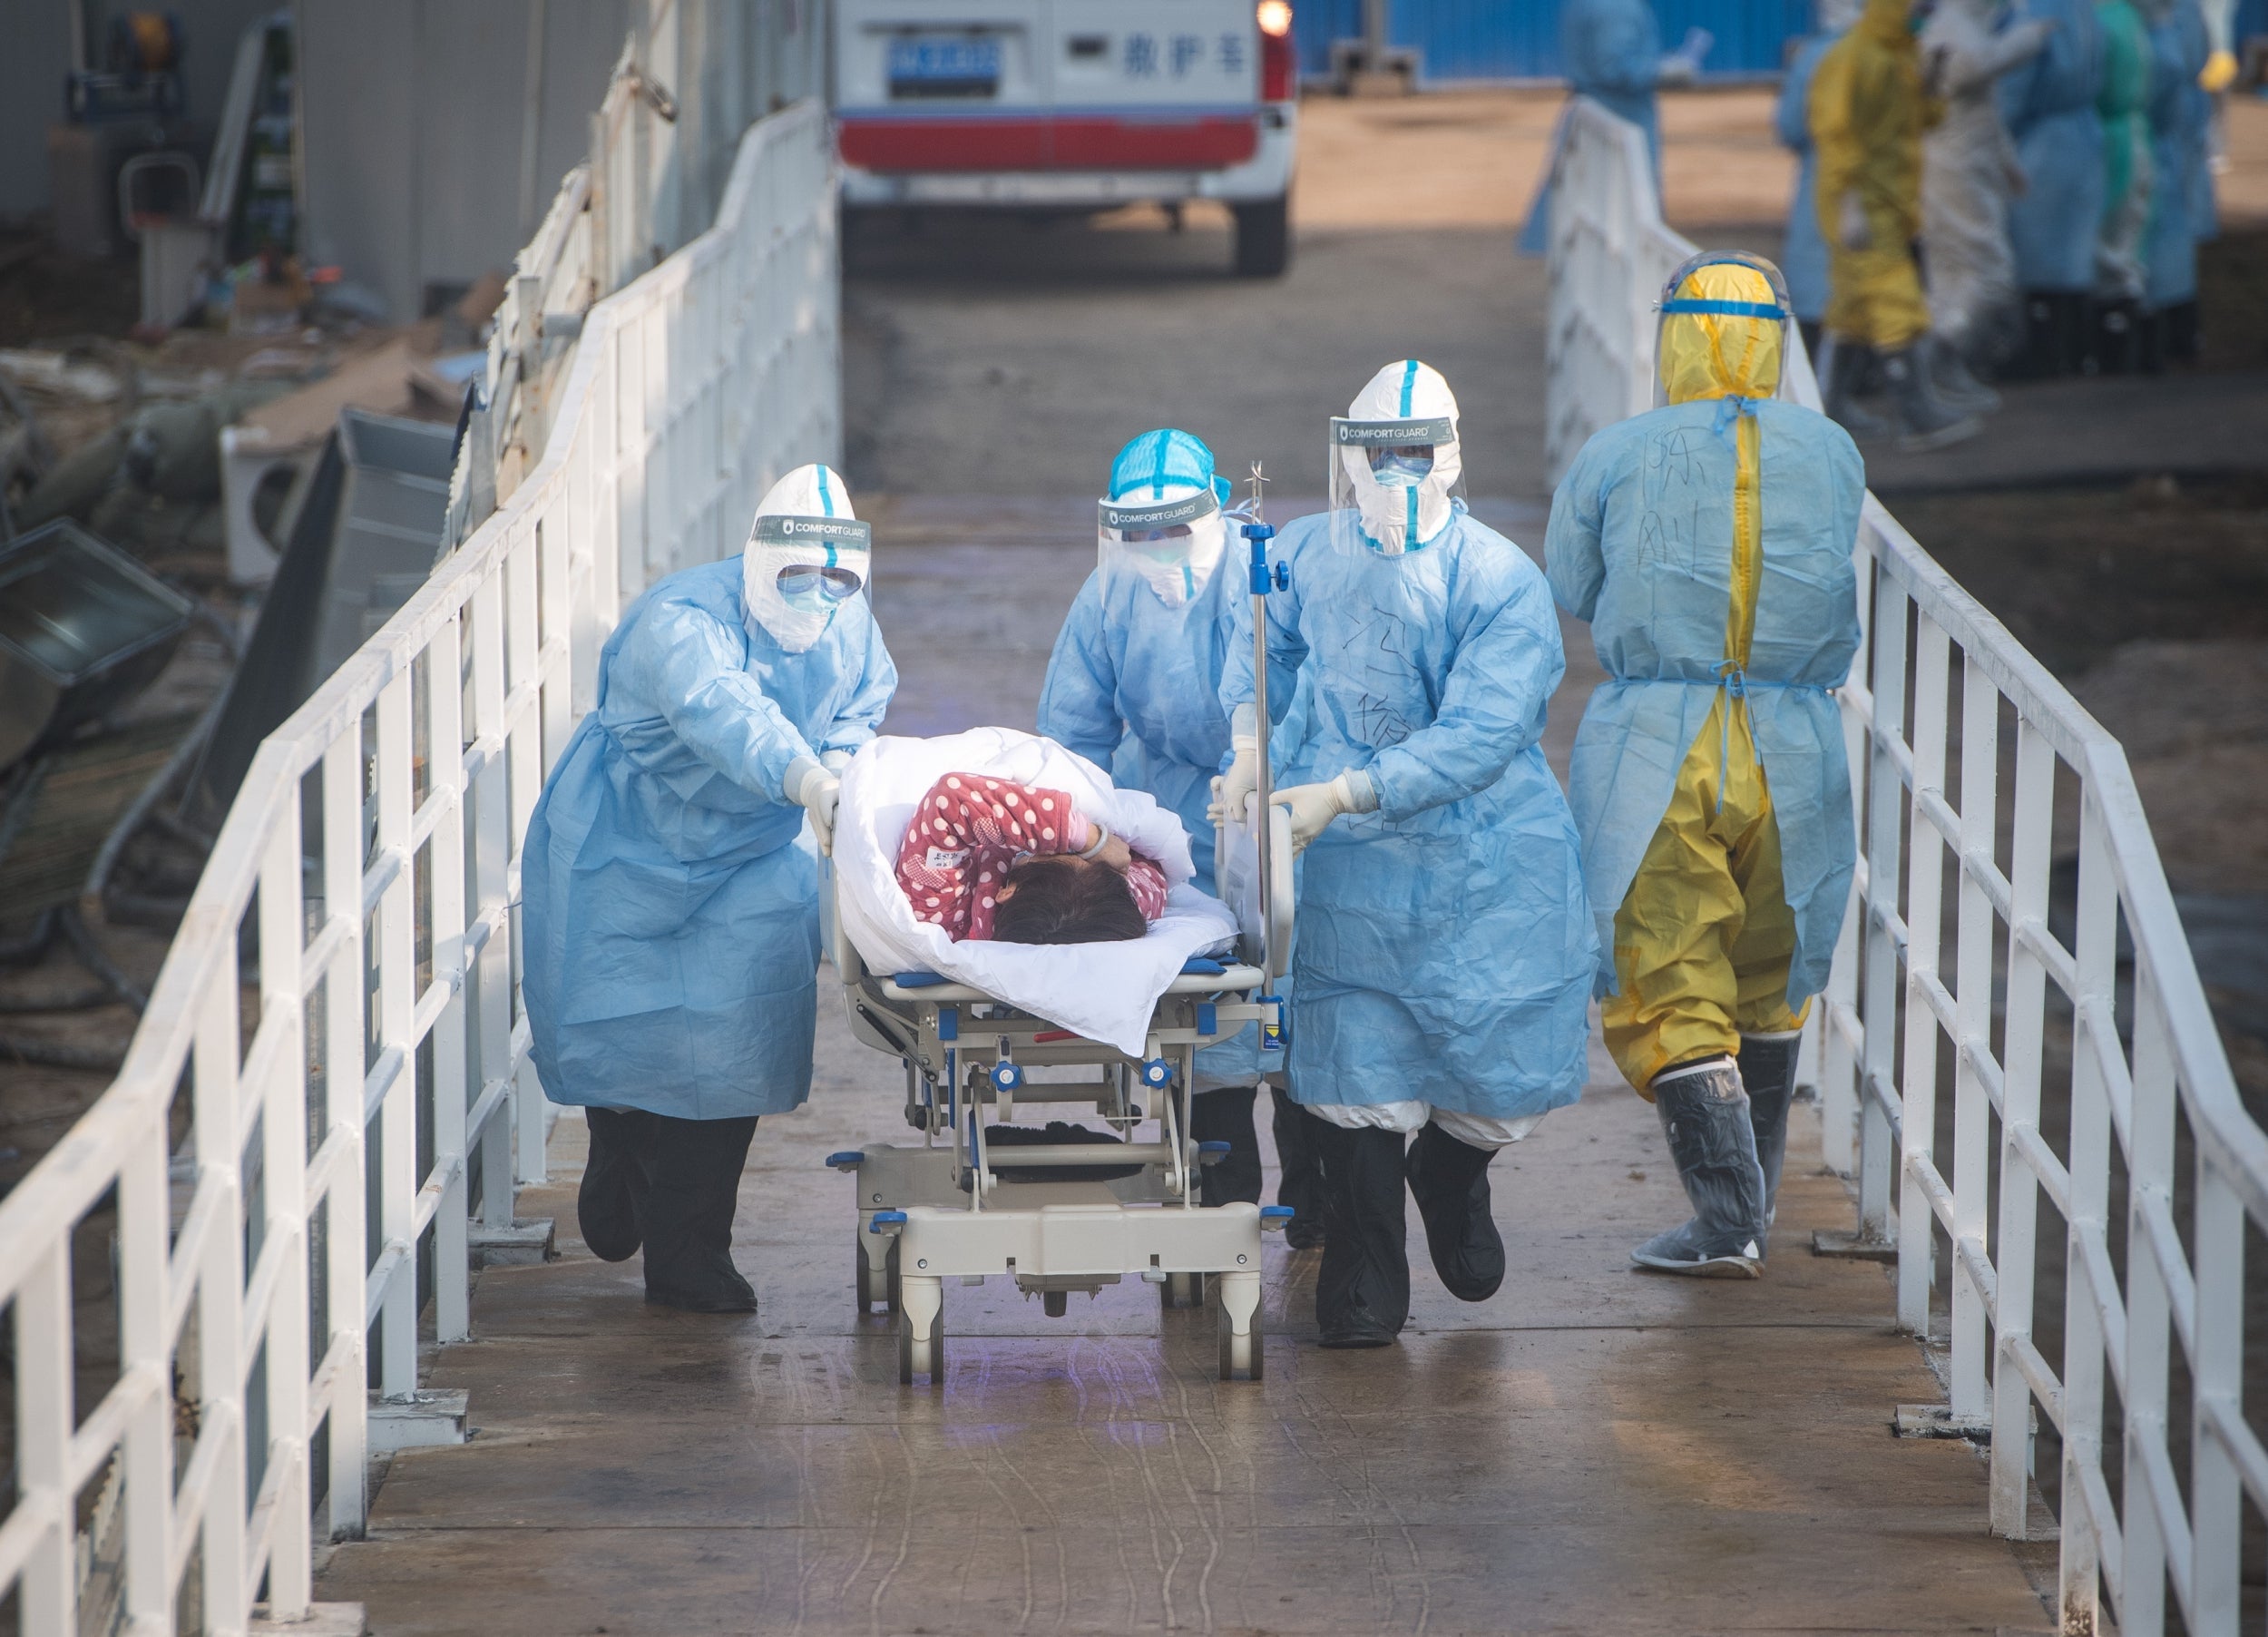 Medical workers help the first batch of patients infected with the novel coronavirus move into their isolation wards at the newly-built Huoshenshan Hospital in Wuhan